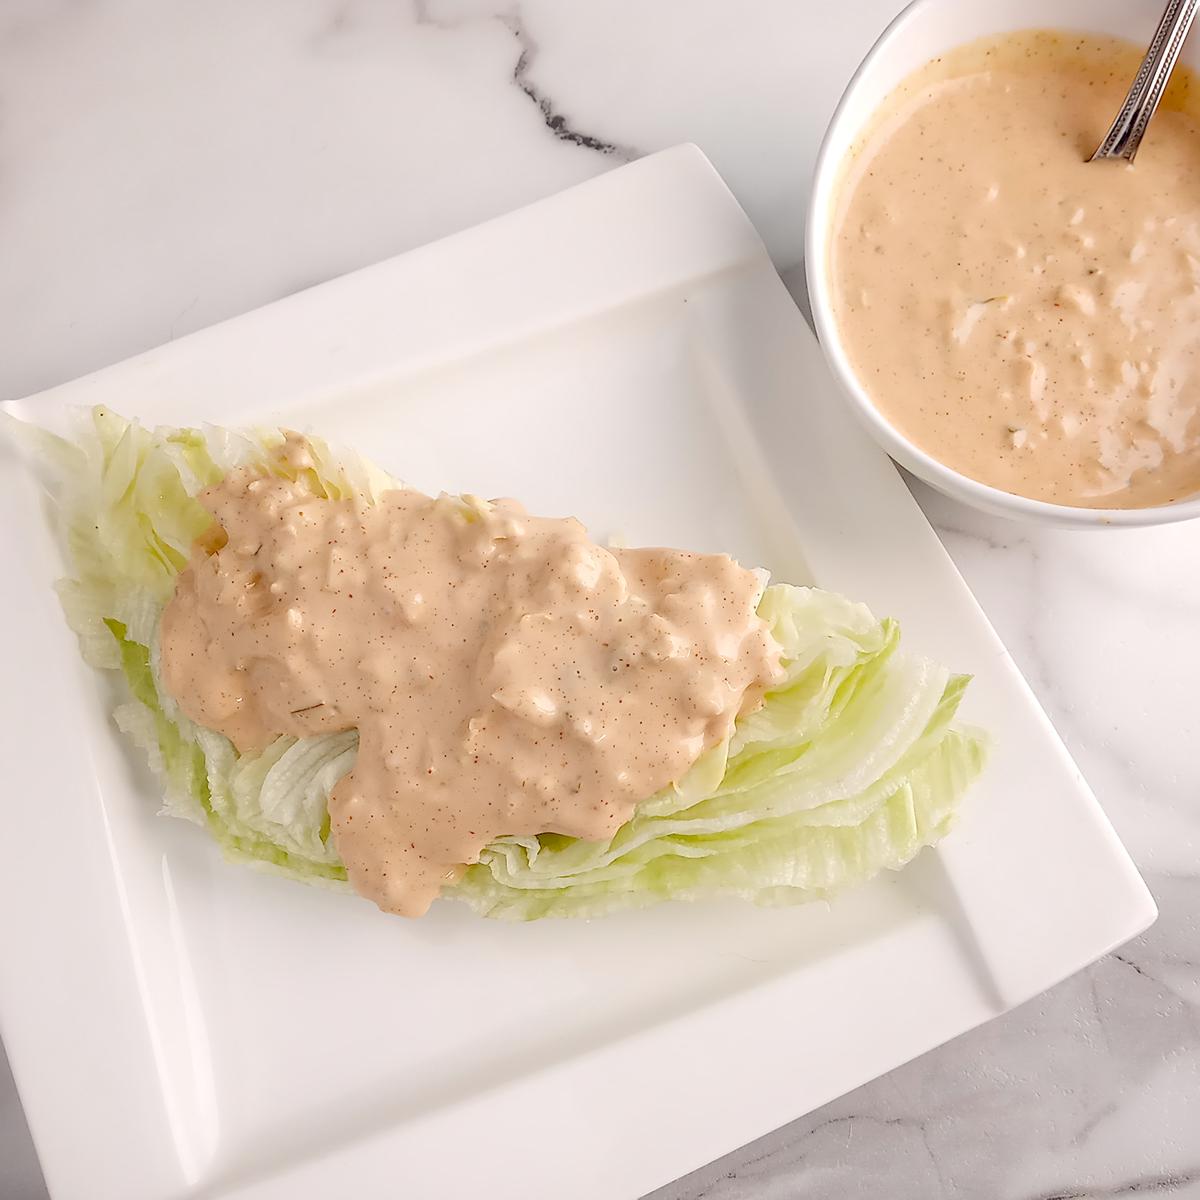 Dressing on lettuce wedge with serving bowl